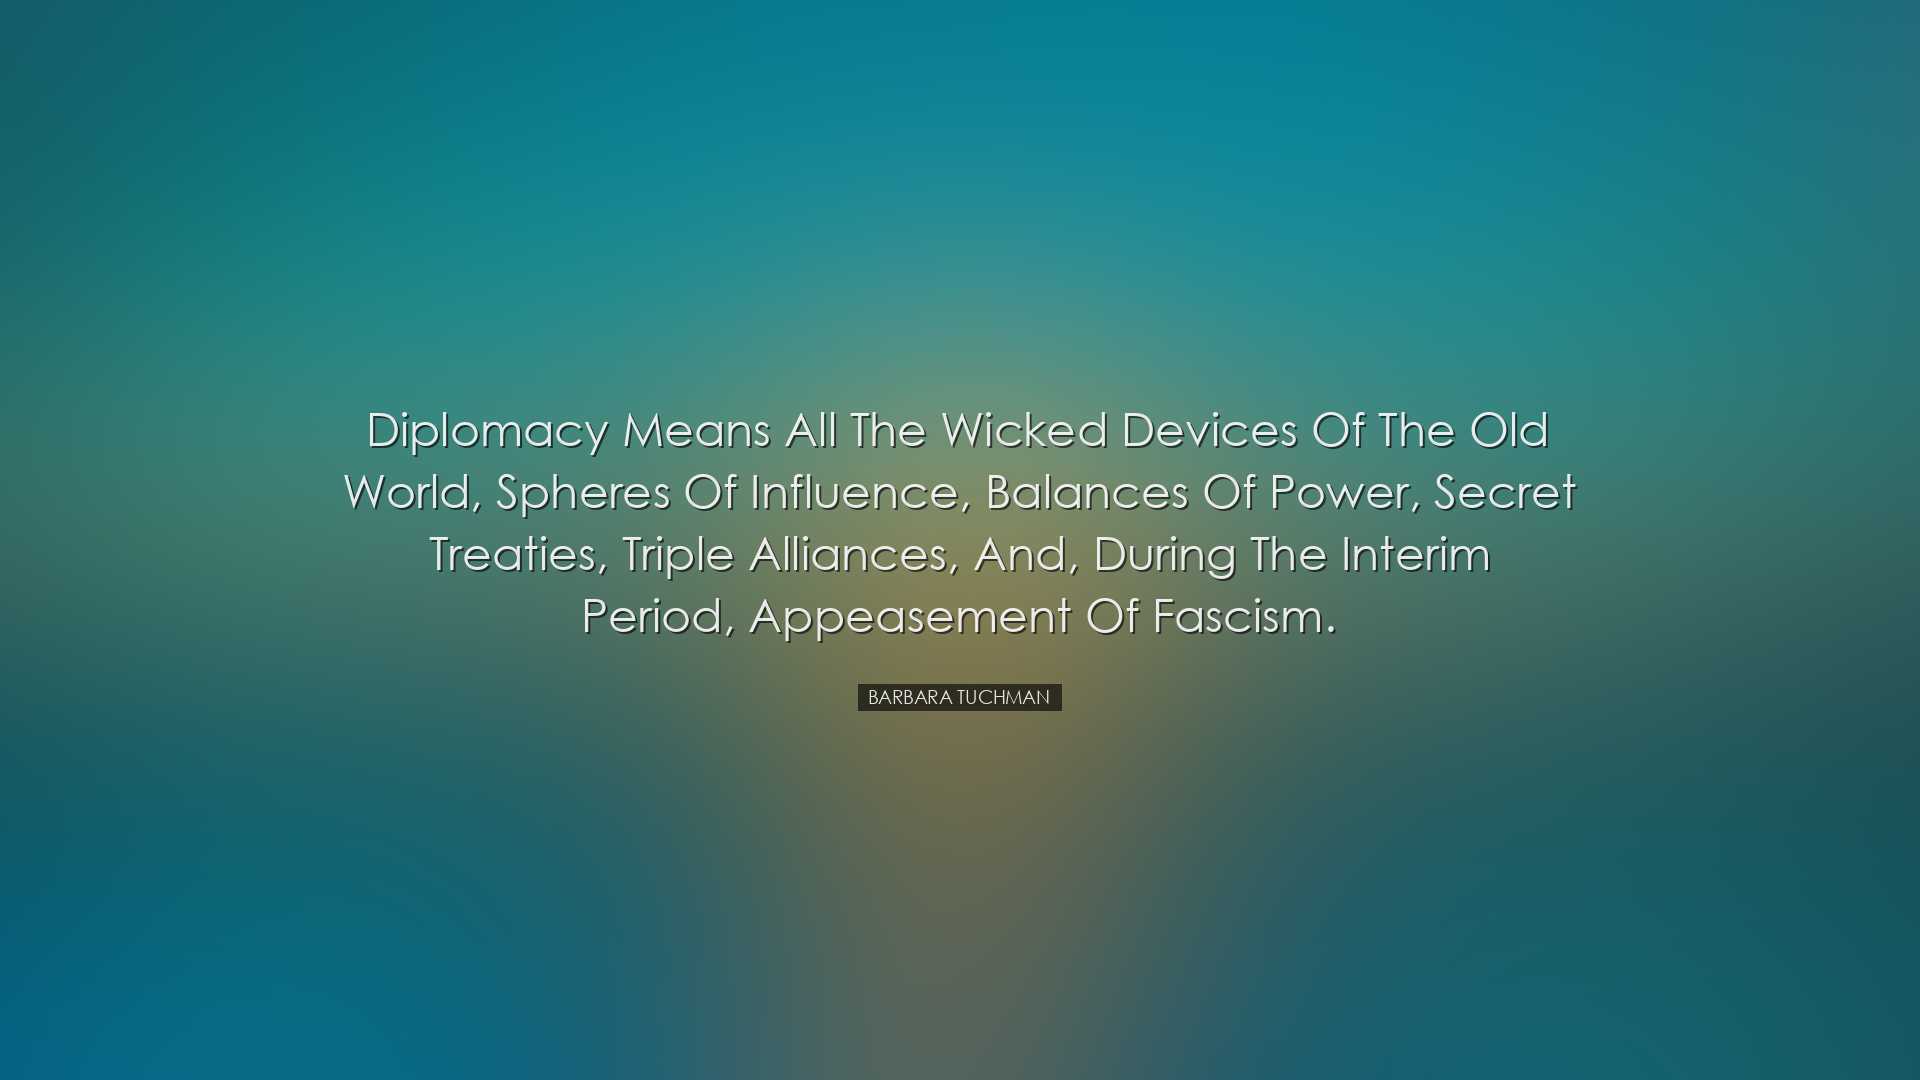 Diplomacy means all the wicked devices of the Old World, spheres o